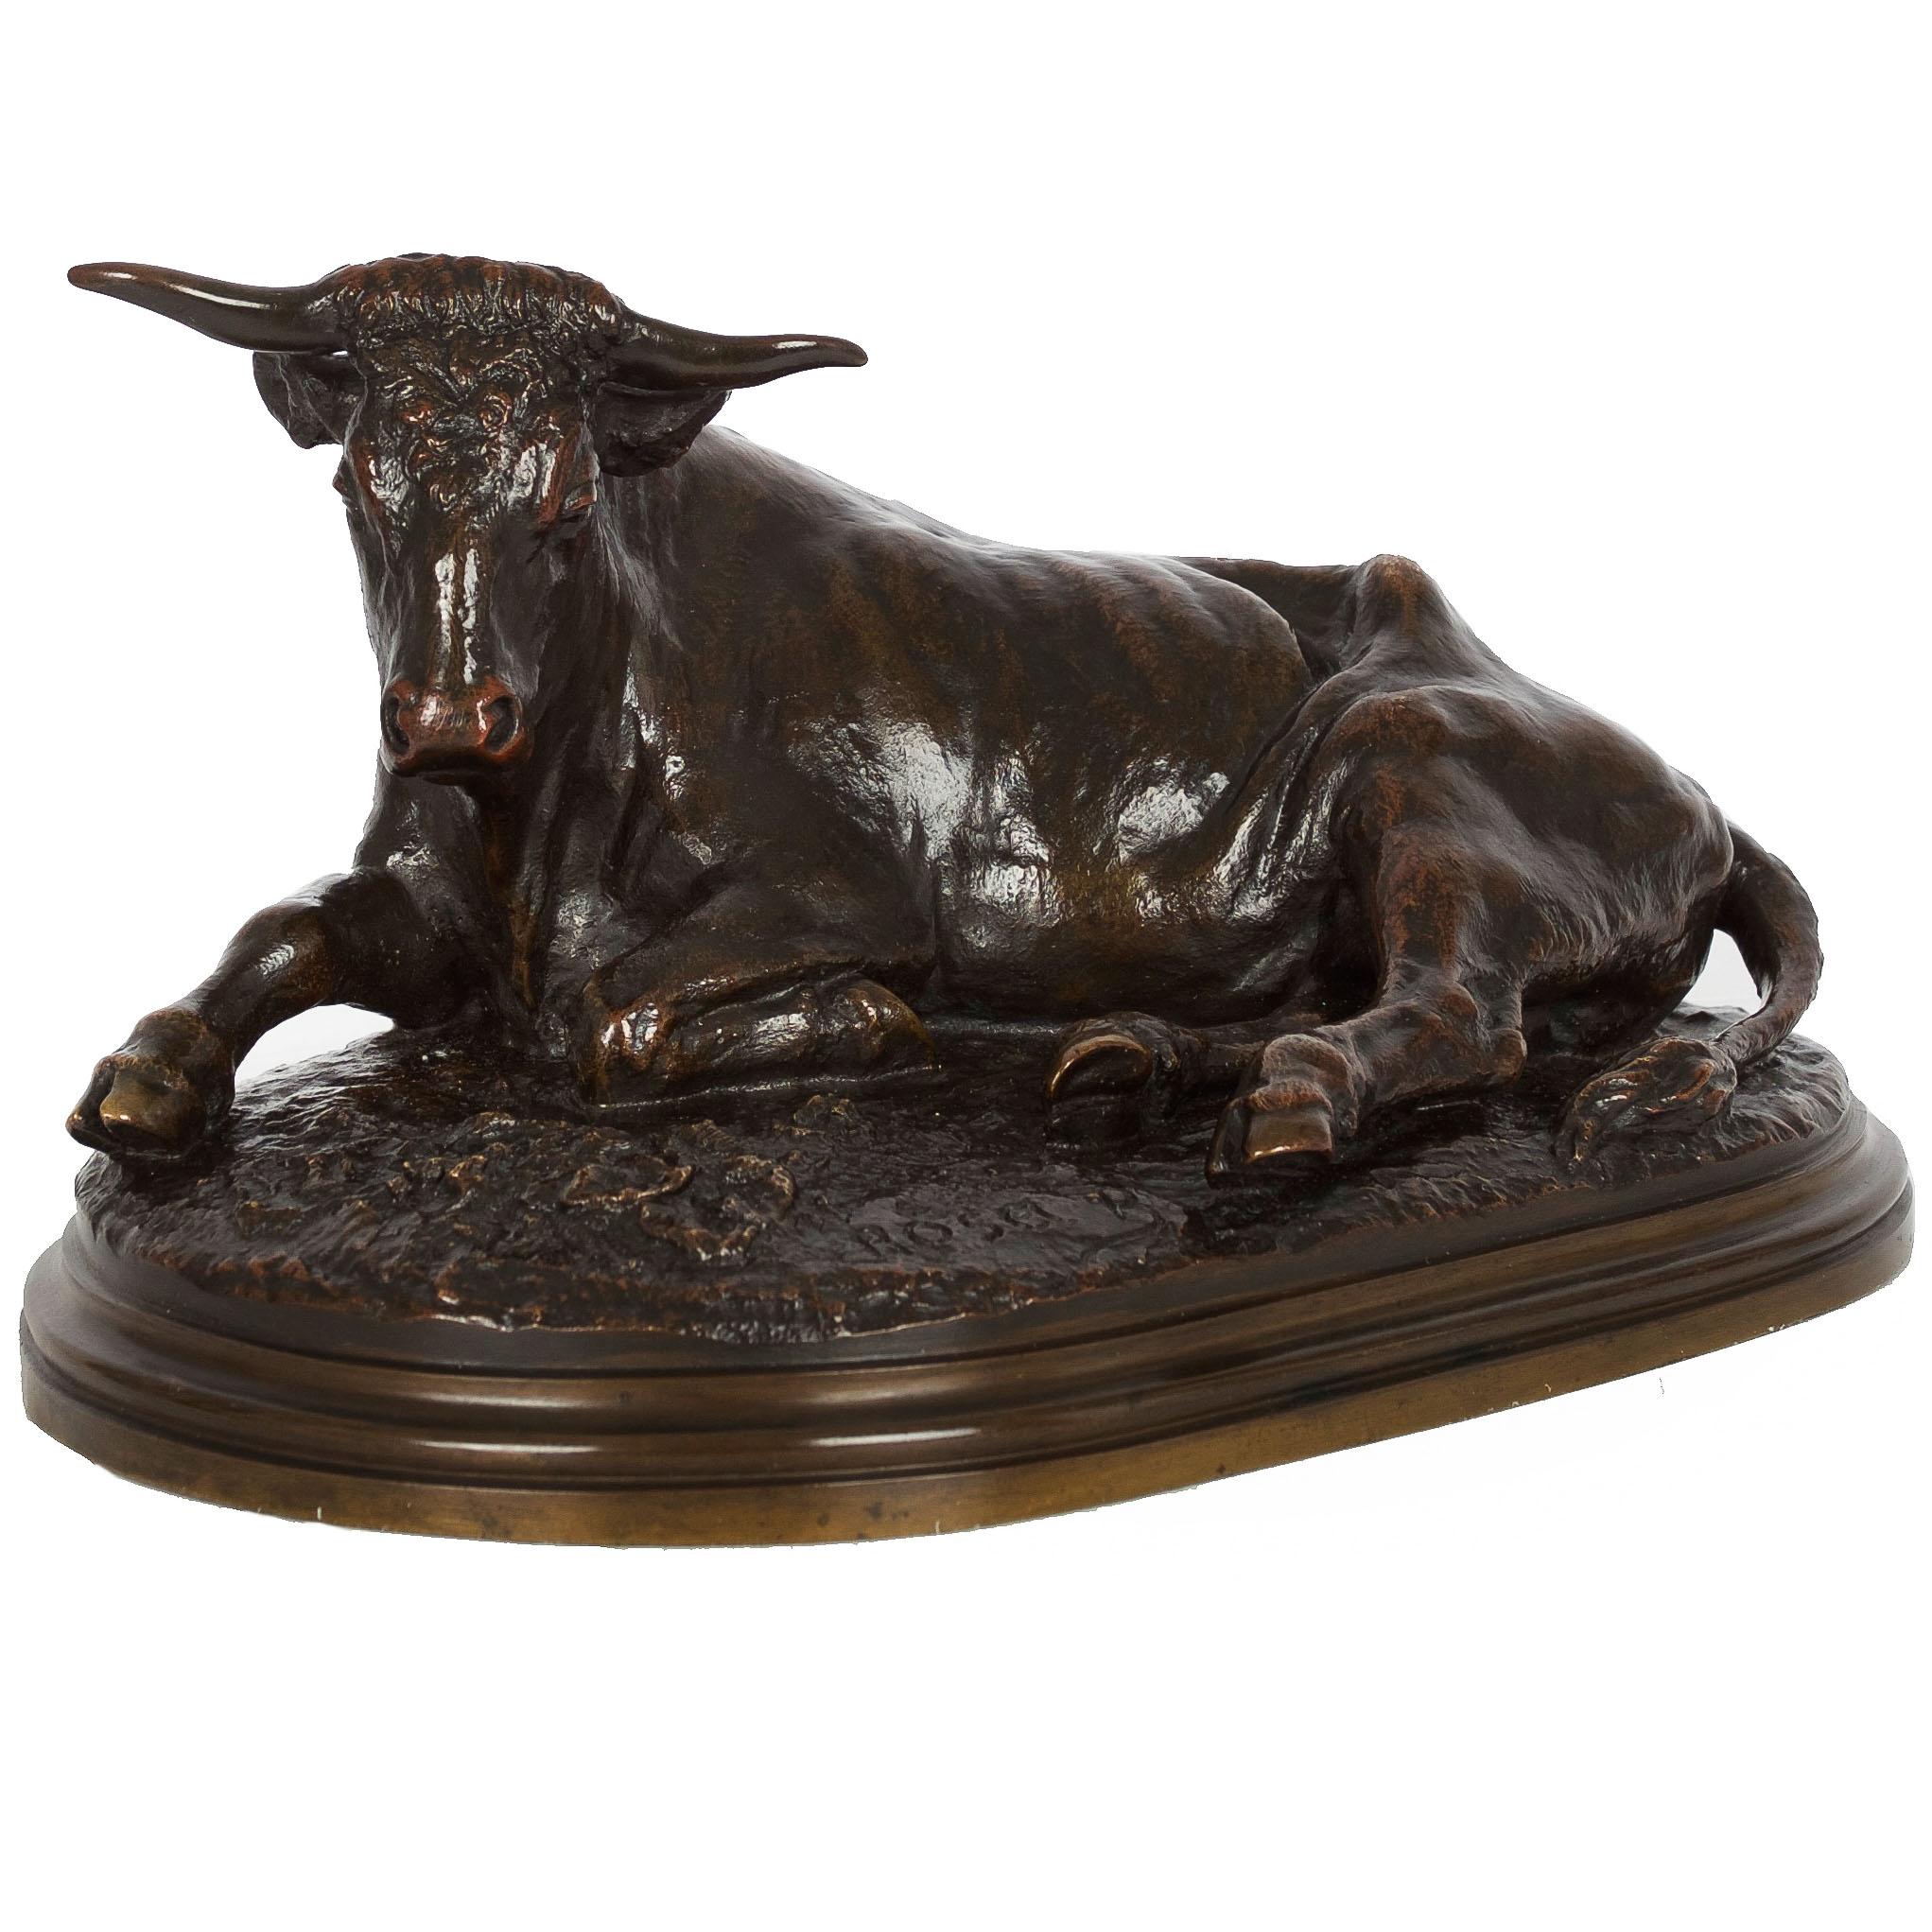 The original model for Boeuf Couché by Rosa Bonheur was conceived in 1846 as a study for her first major painting Le Boeufs du Cantal and was also executed in charcoal on paper the same year. An identical example of this model is held in the